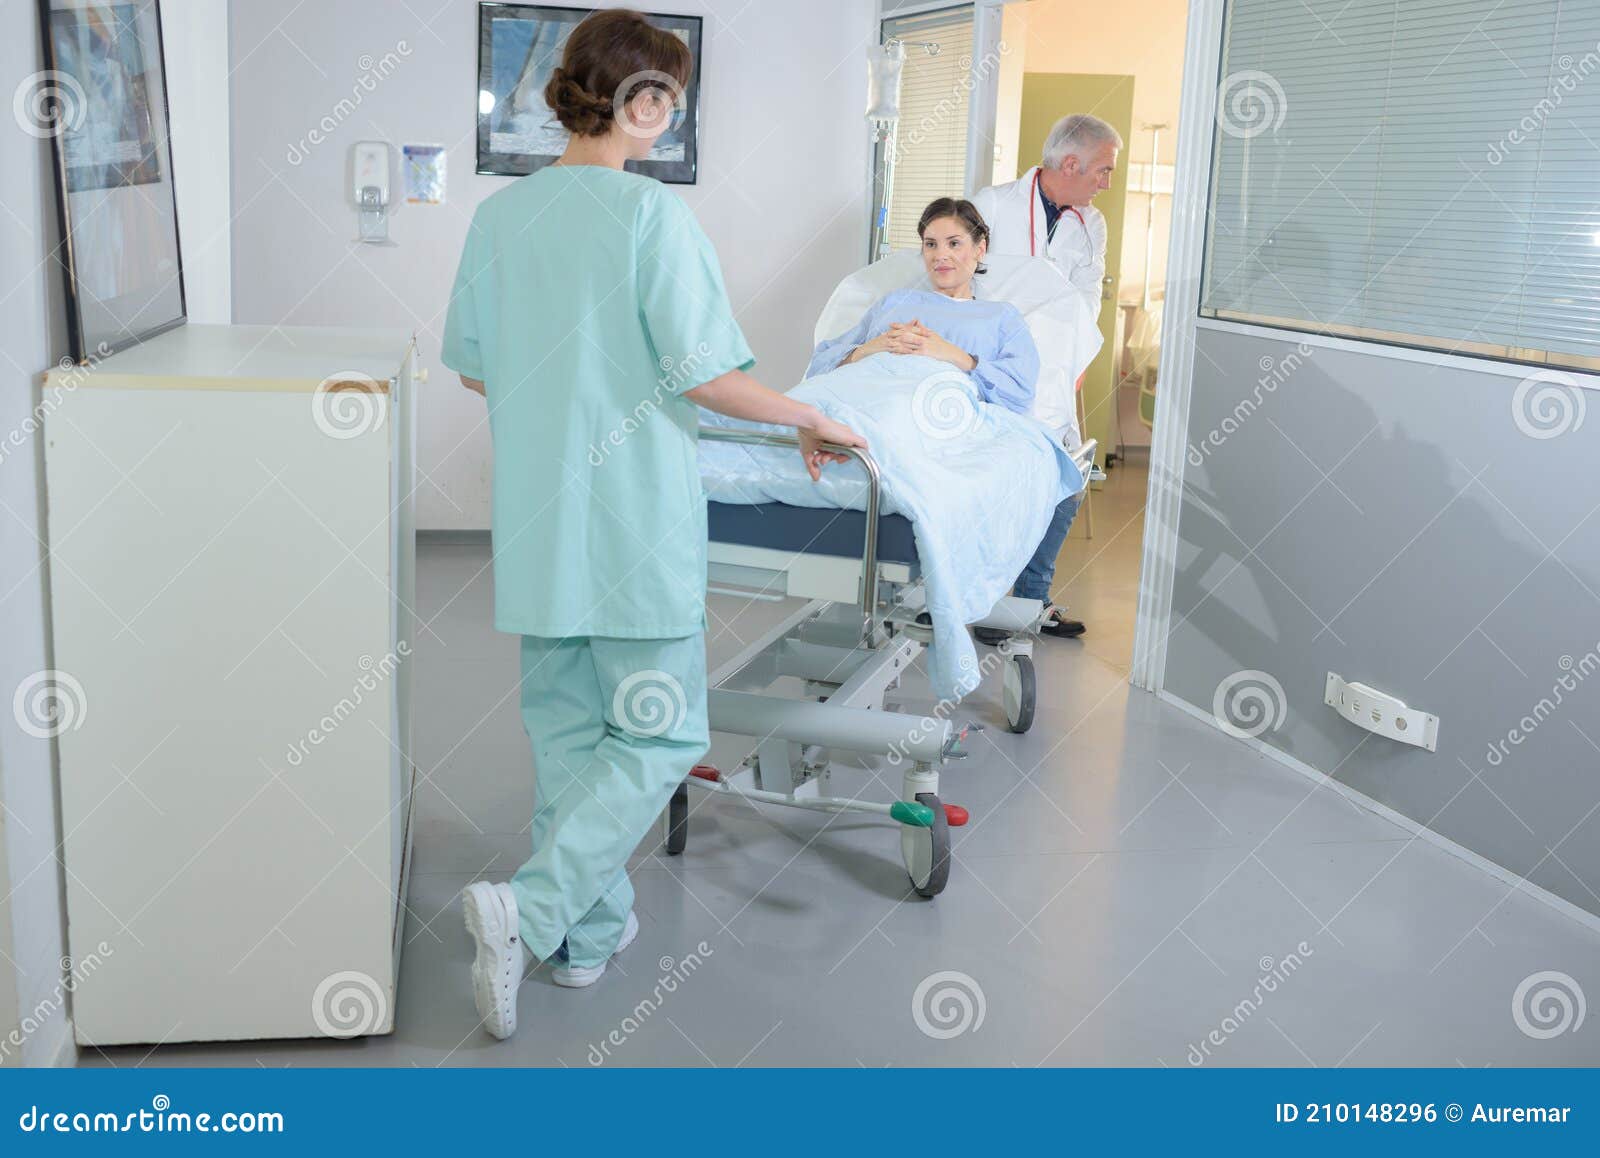 patient being wheeled on hospital stretcher